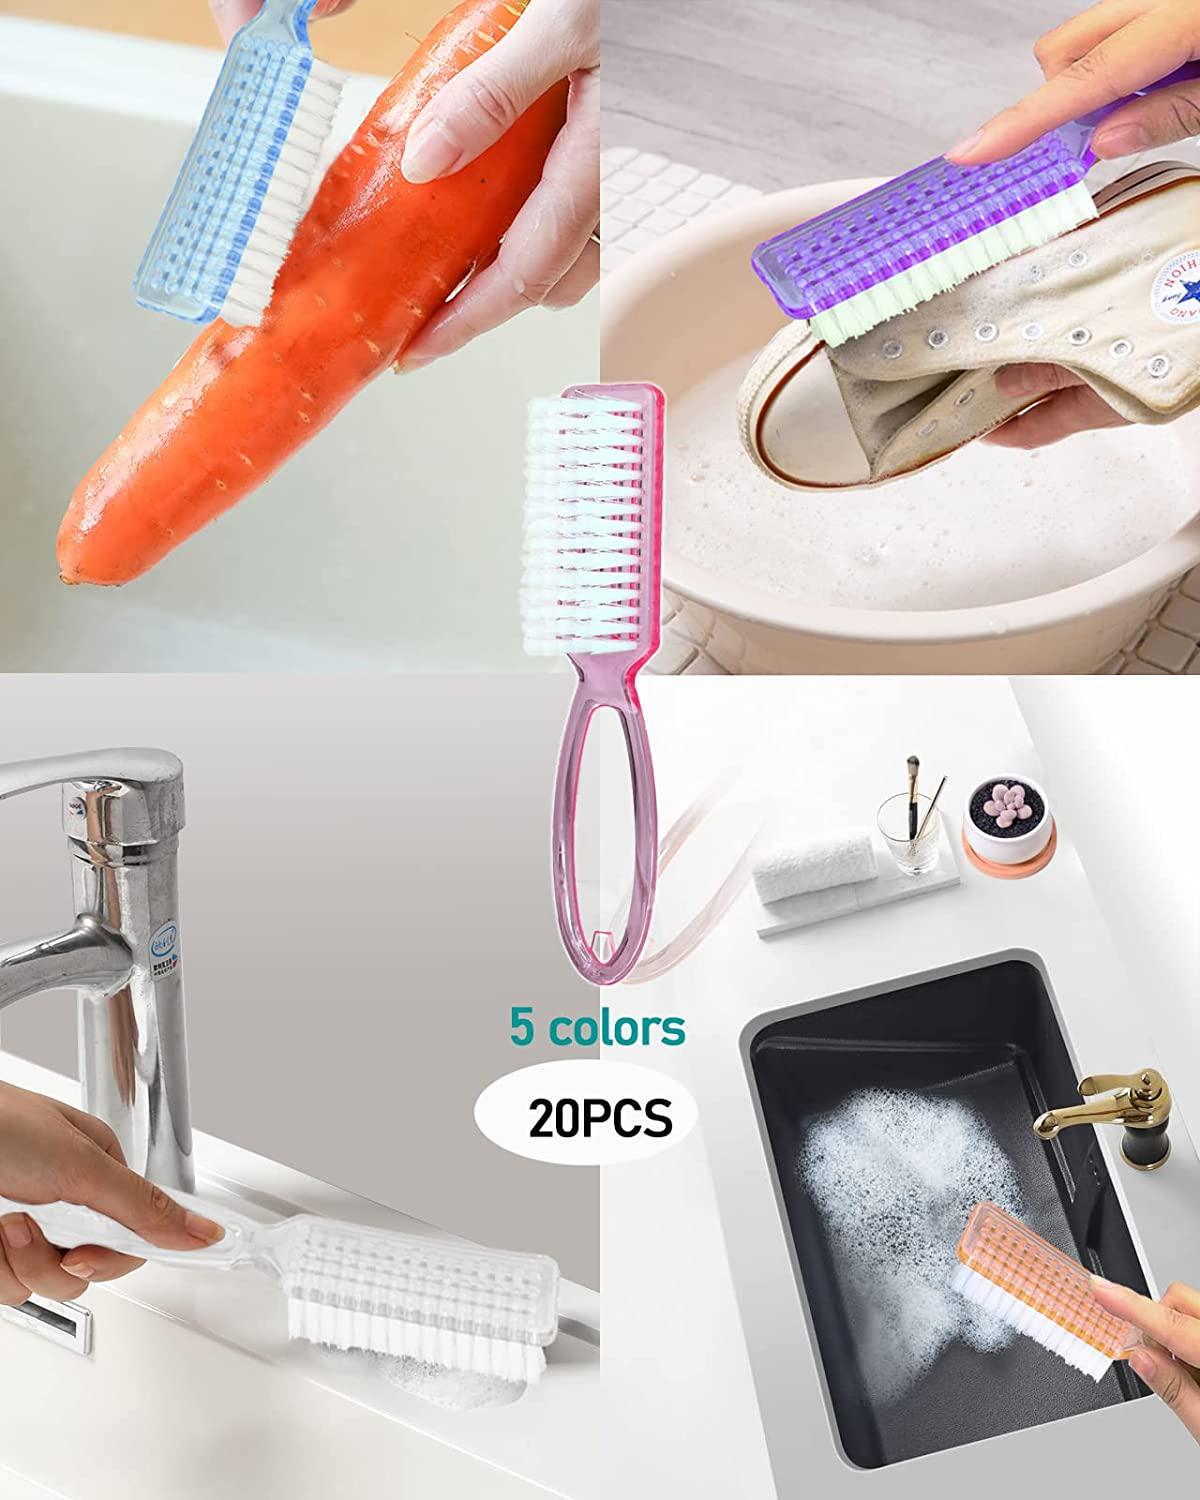 Nail Brush for Cleaning Fingernails, Handle Grip Nail Scrubber